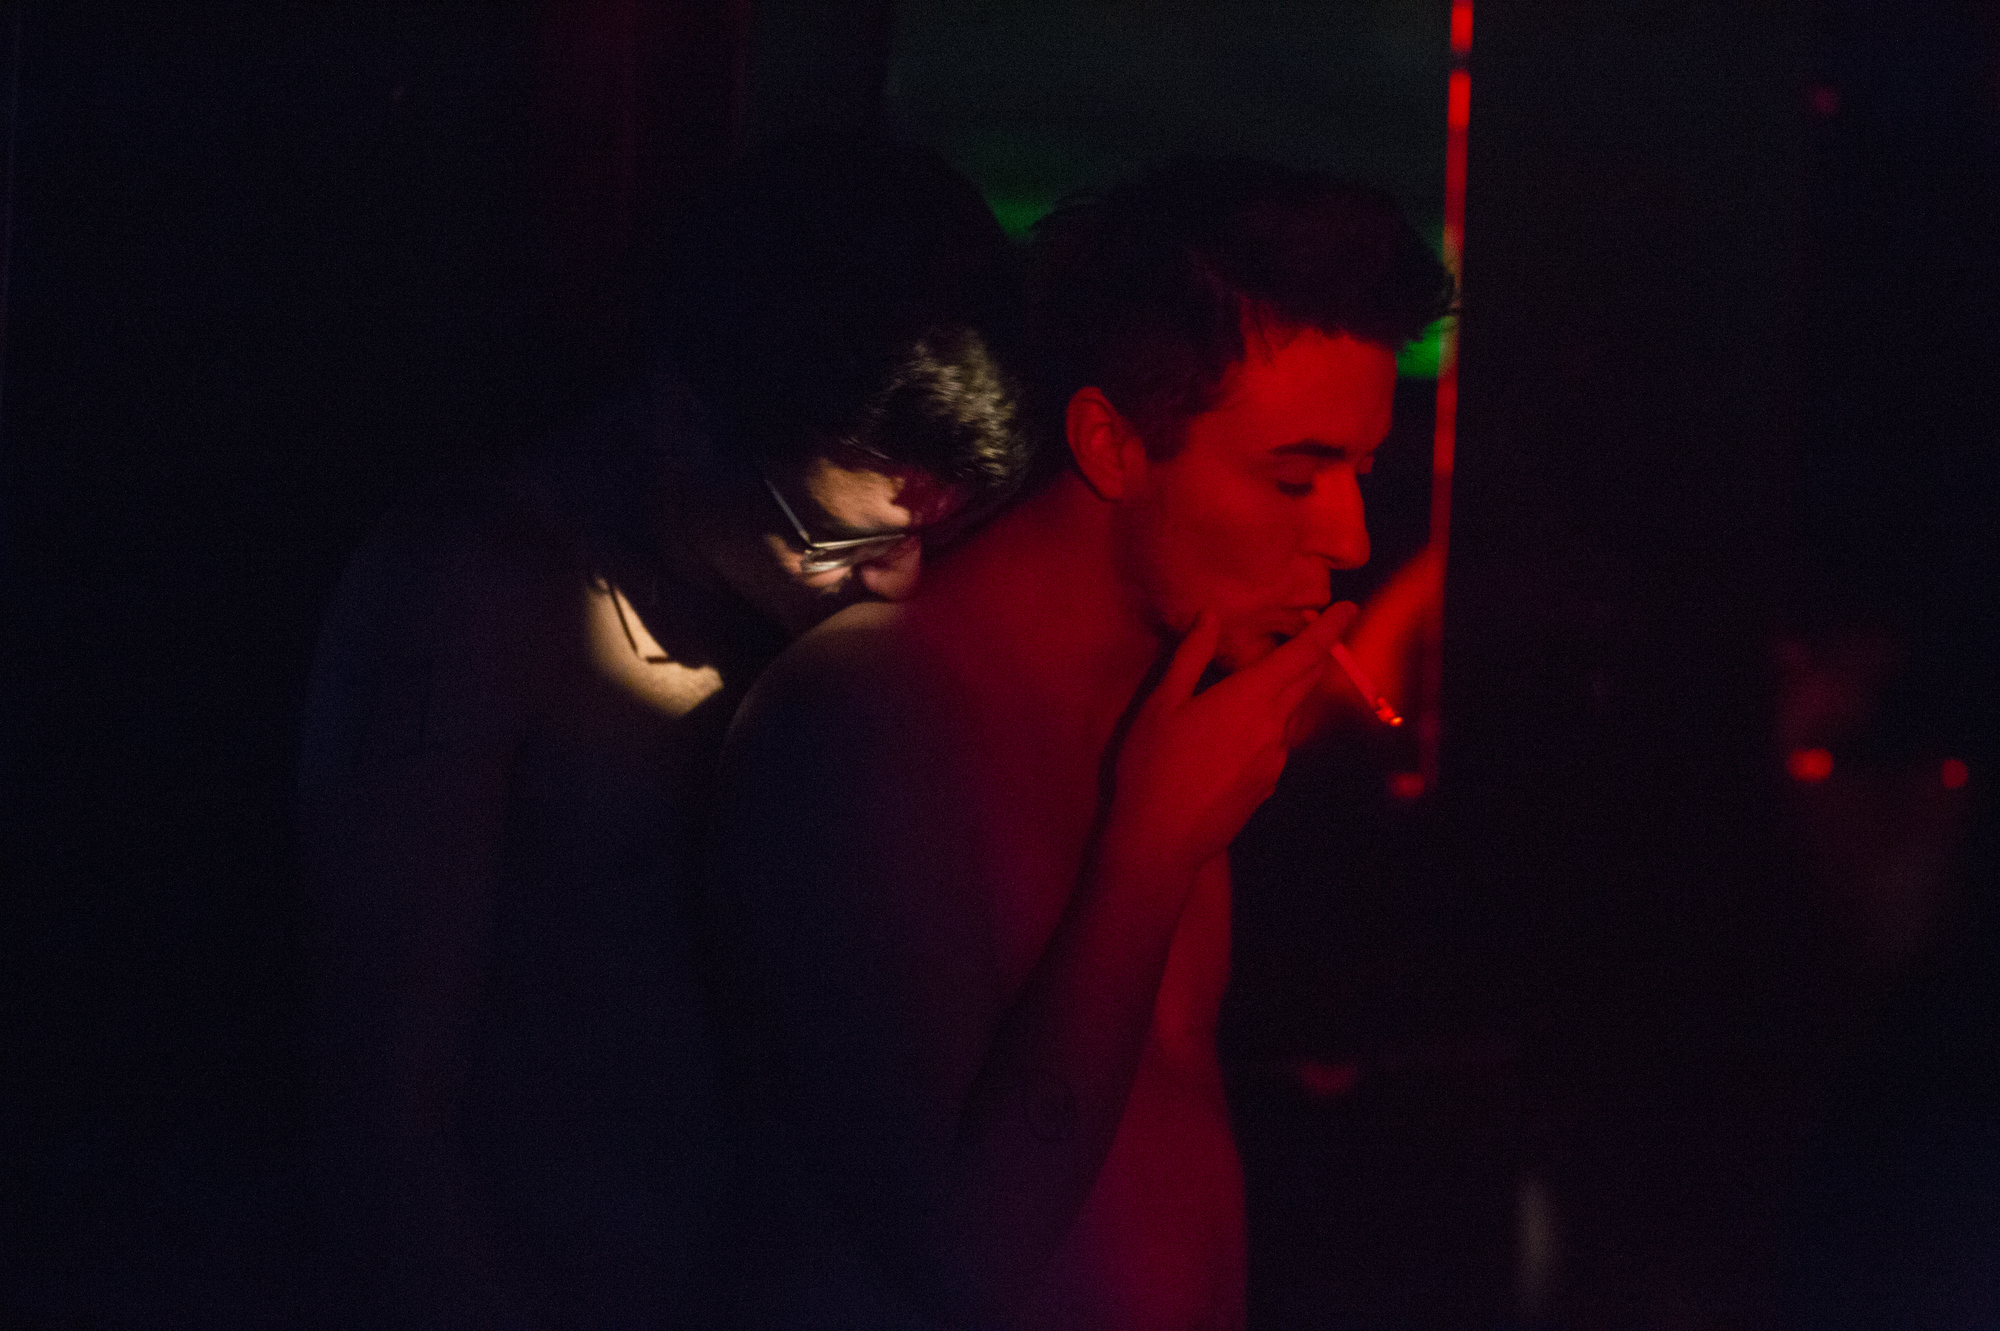  Nicholas Presulti, left, and Billie Kincaid dance at Man's Country, the longest running gay bathhouse in Chicago.  To celebrate 44 years of business, they threw one final party before shuttering forever. 